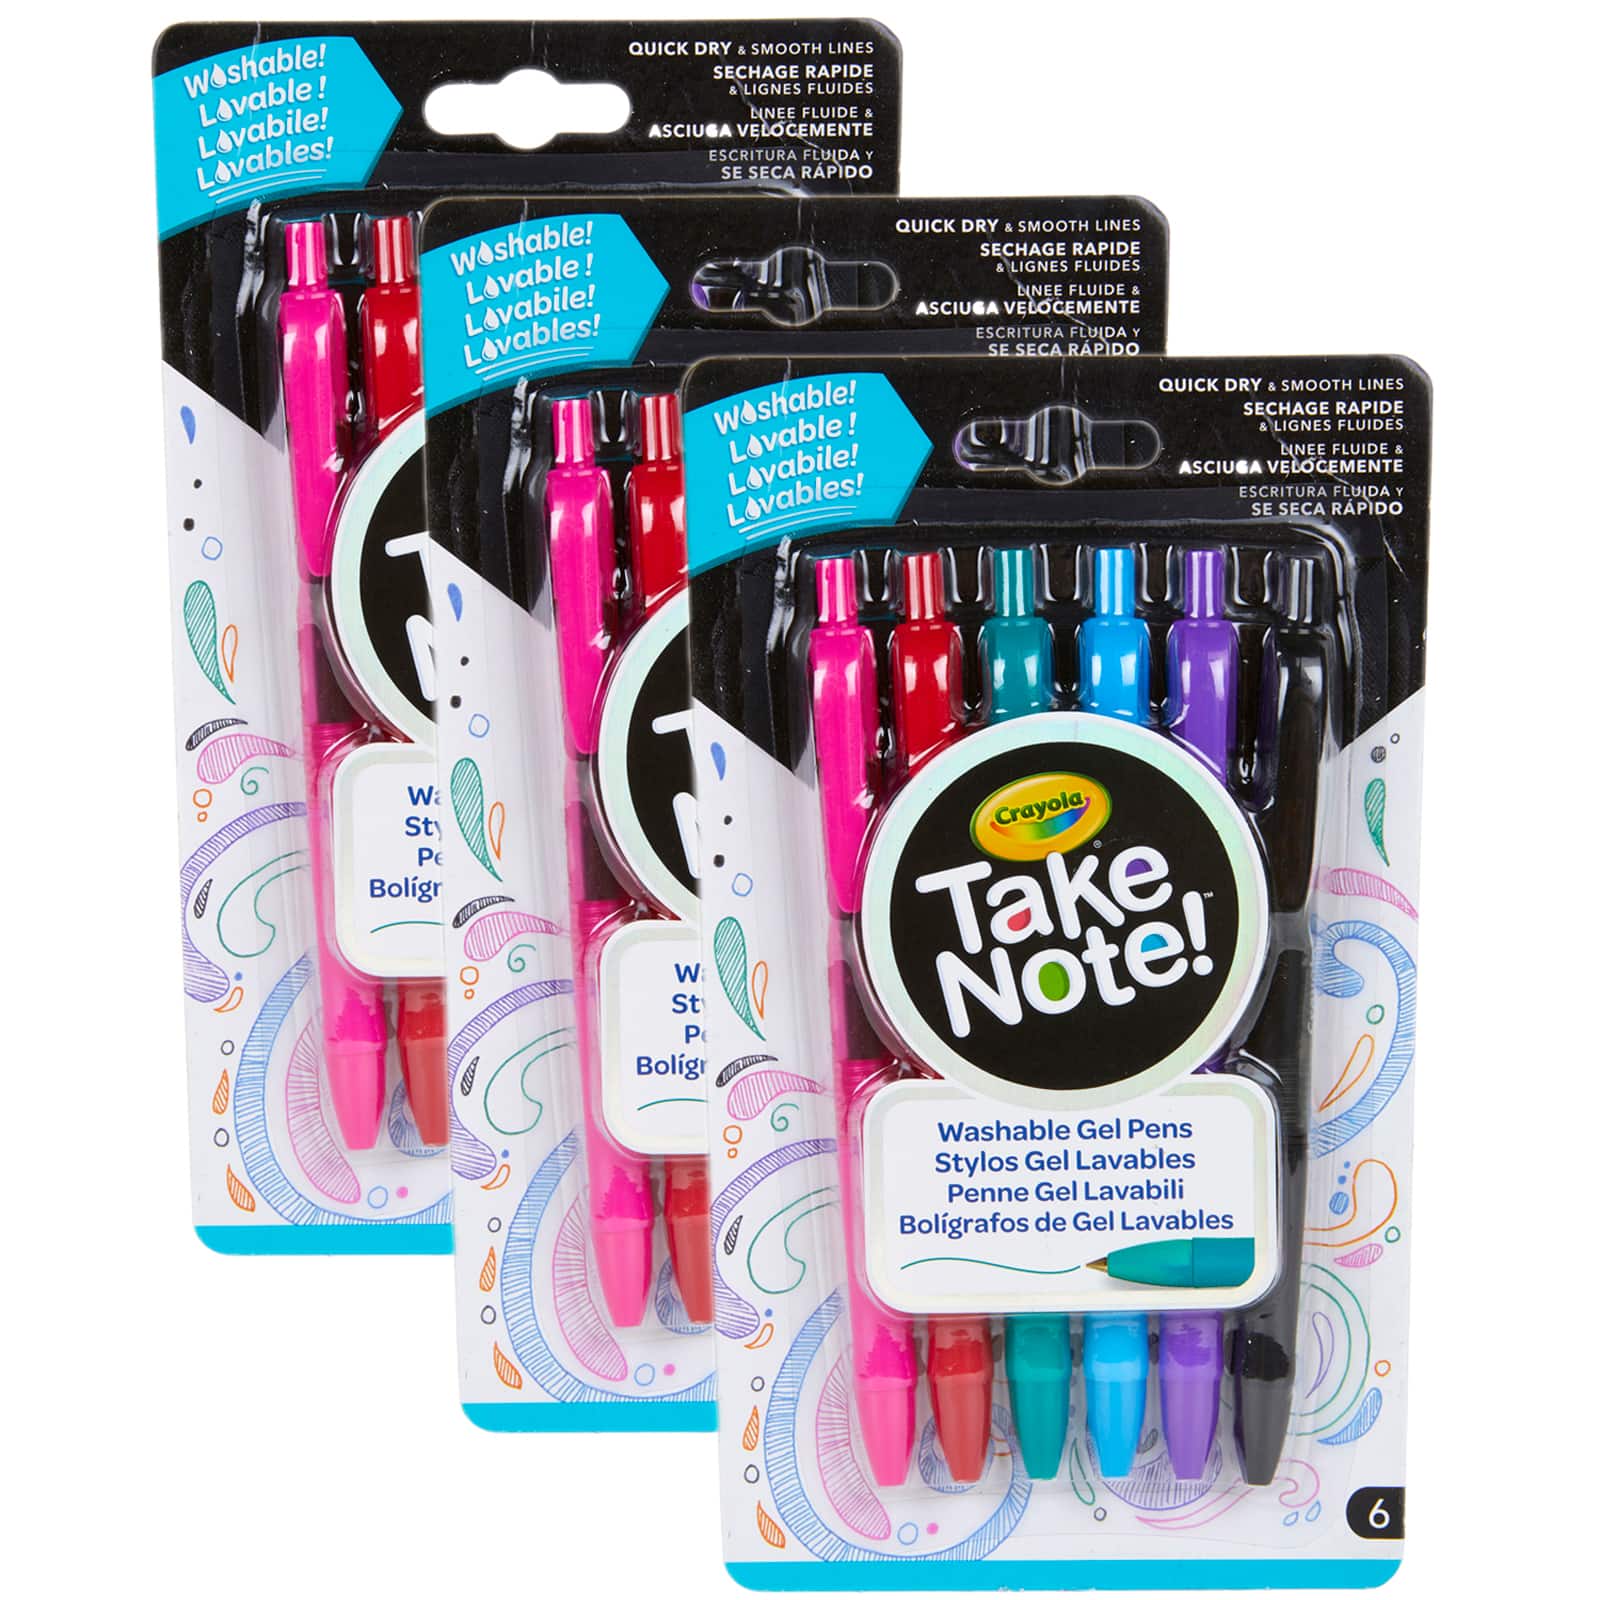 Take Note Washable Gel Pens, 6 Count, Crayola.com